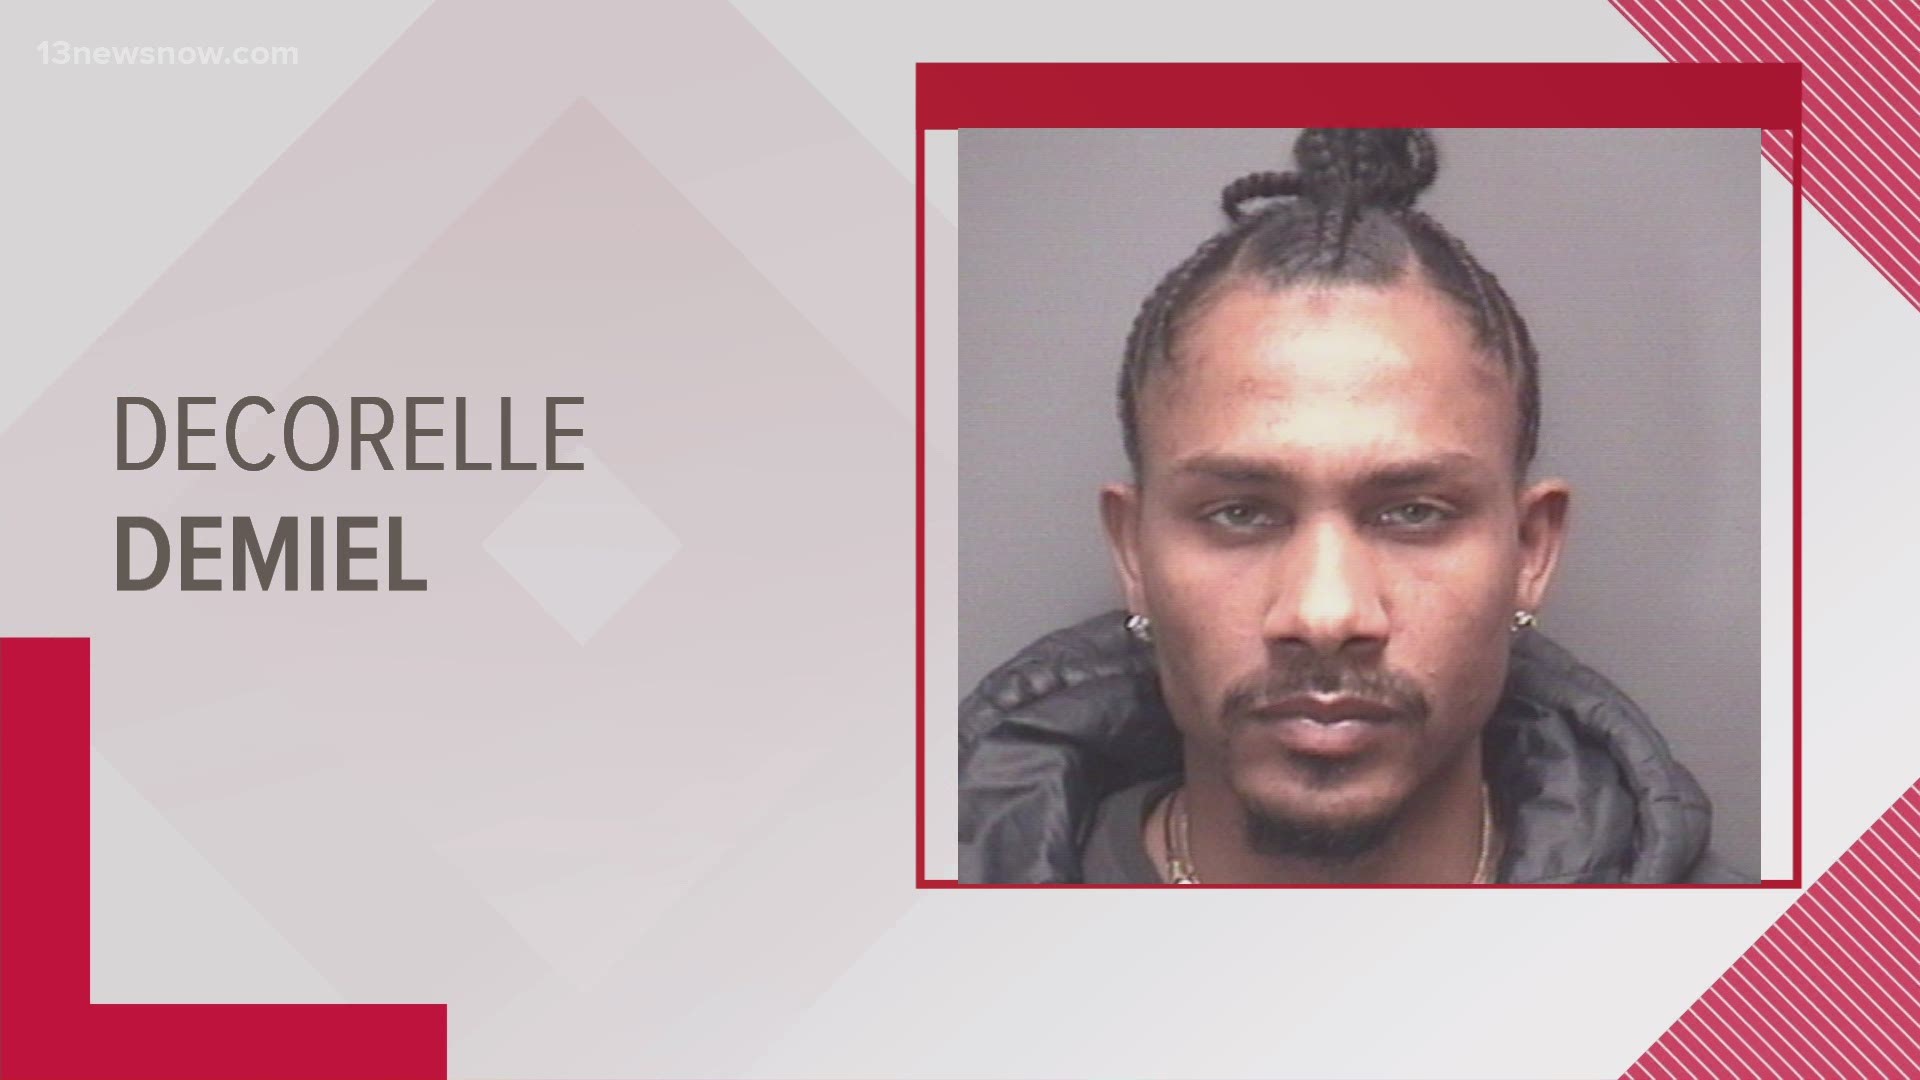 Decorelle Demiel is accused of rape and taking indecent liberties with a girl younger than age 15.